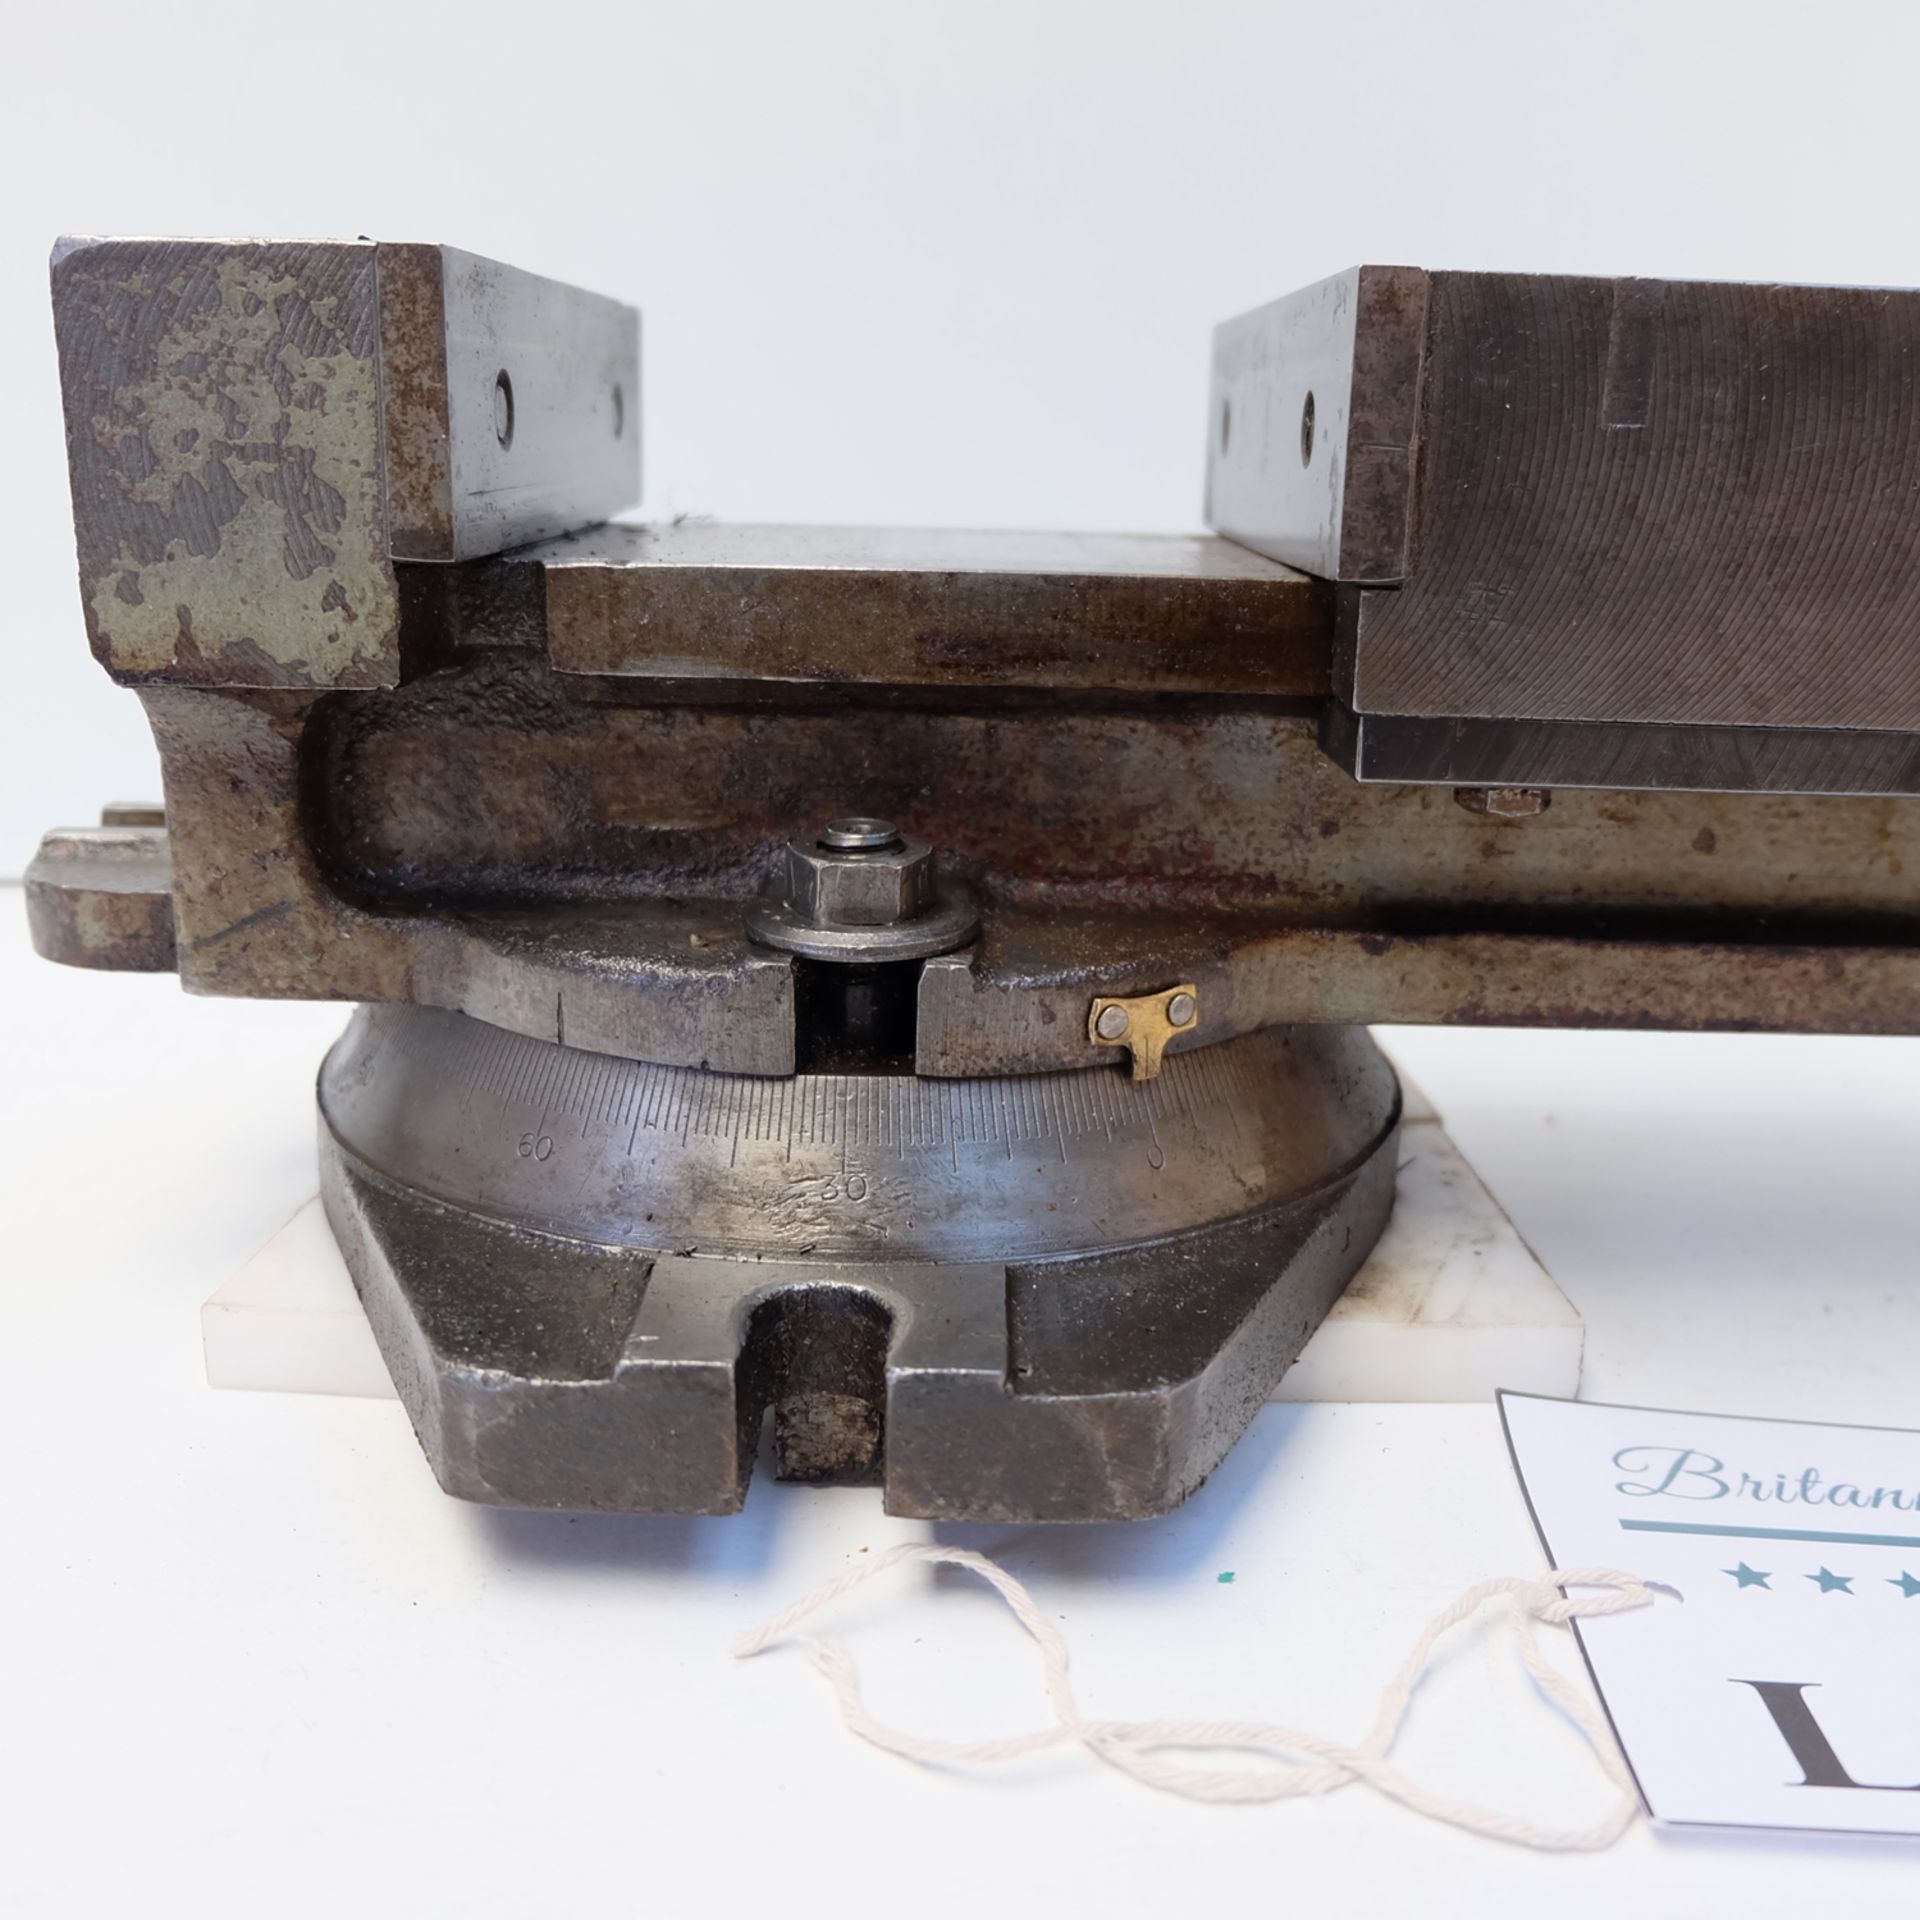 Swivelling Machine Vice. Jaw Width 6". Max Opening 4 1/4". Jaw Height 1 1/2" Approx. - Image 4 of 4